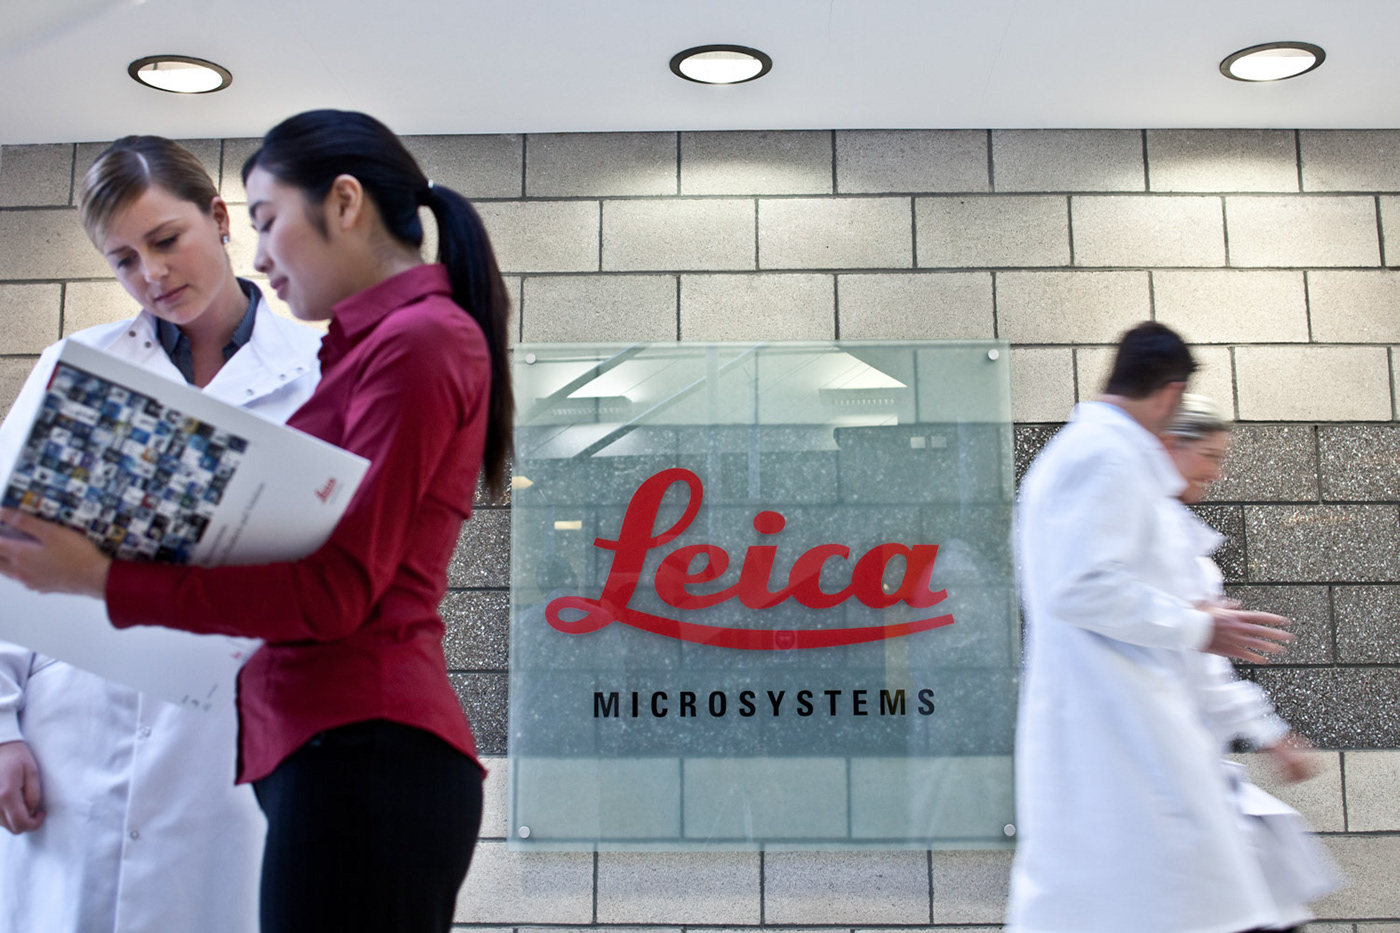 Leica makeup models Photography  science